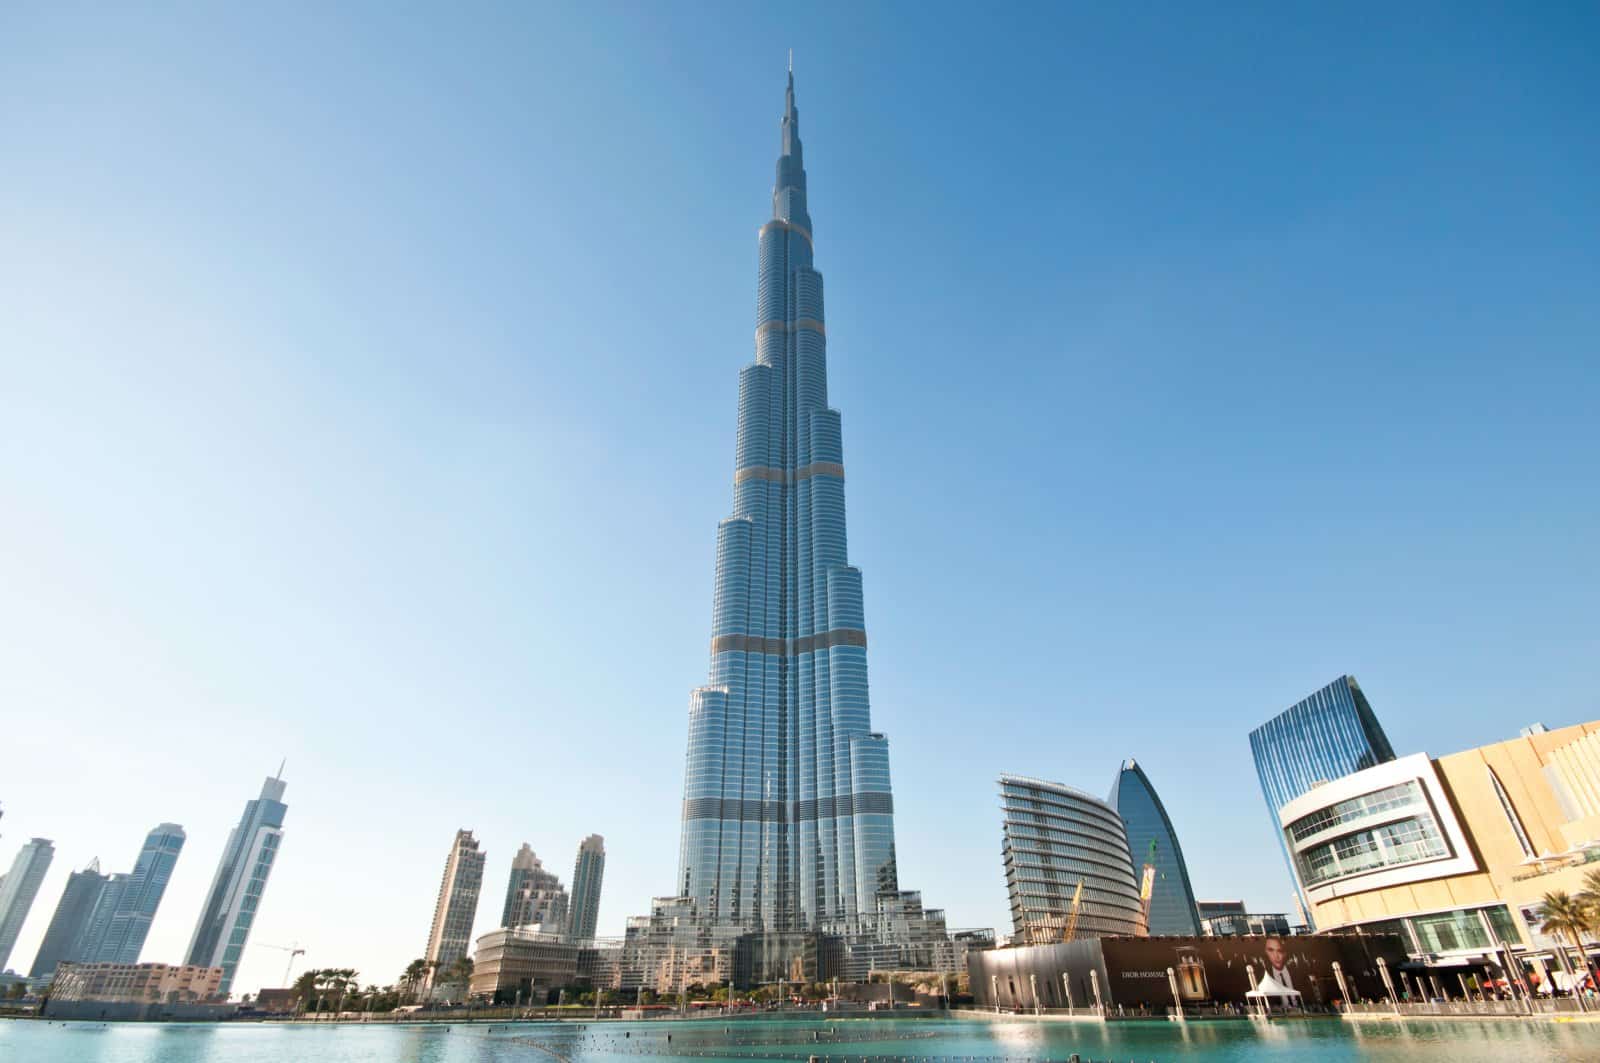 Image Credit: Shutterstock / Ilona Ignatova <p>Dubai and Abu Dhabi attract many British tourists, but the clash between Western behaviour and local laws can cause friction. Public displays of drunkenness and inappropriate attire have led to legal troubles for some.</p>